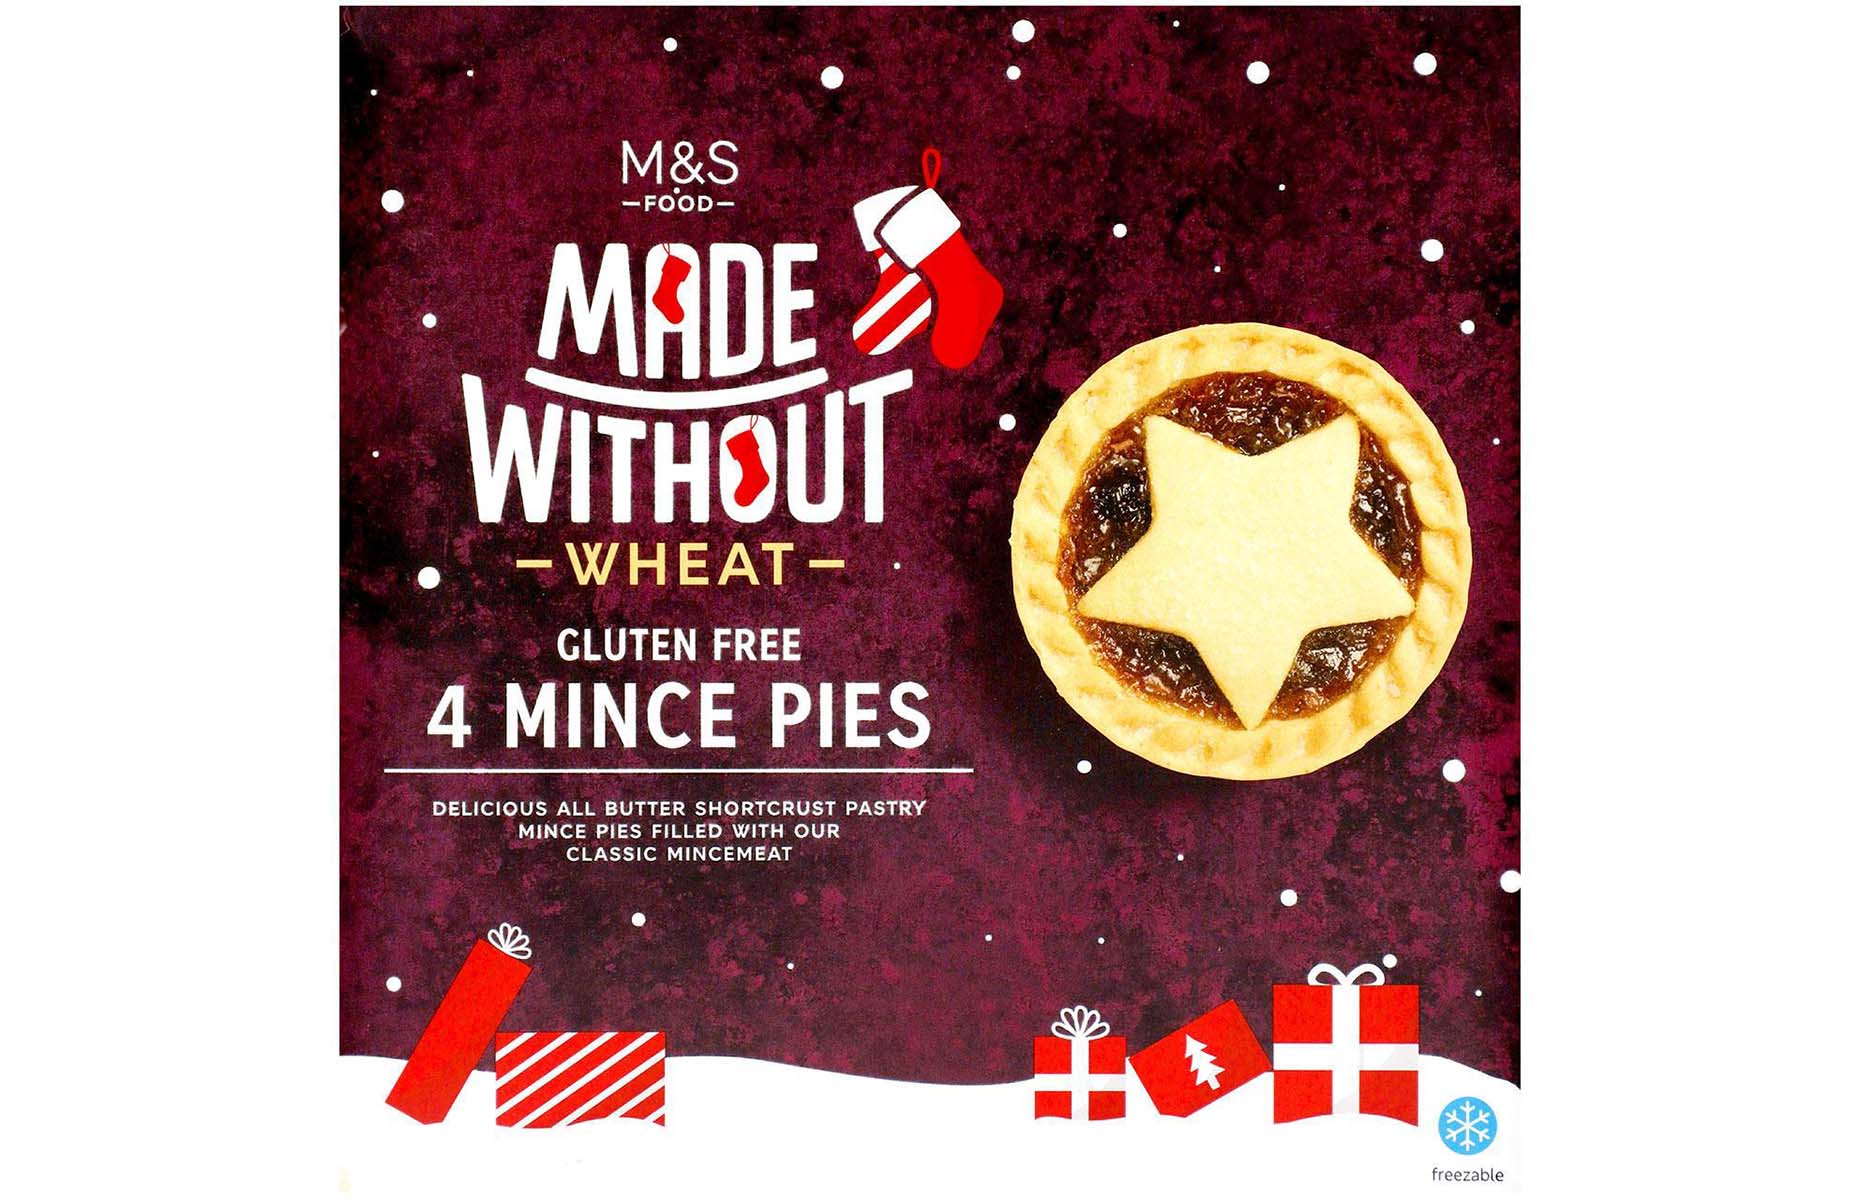 M&S Made Without gluten-free mince pies 2021